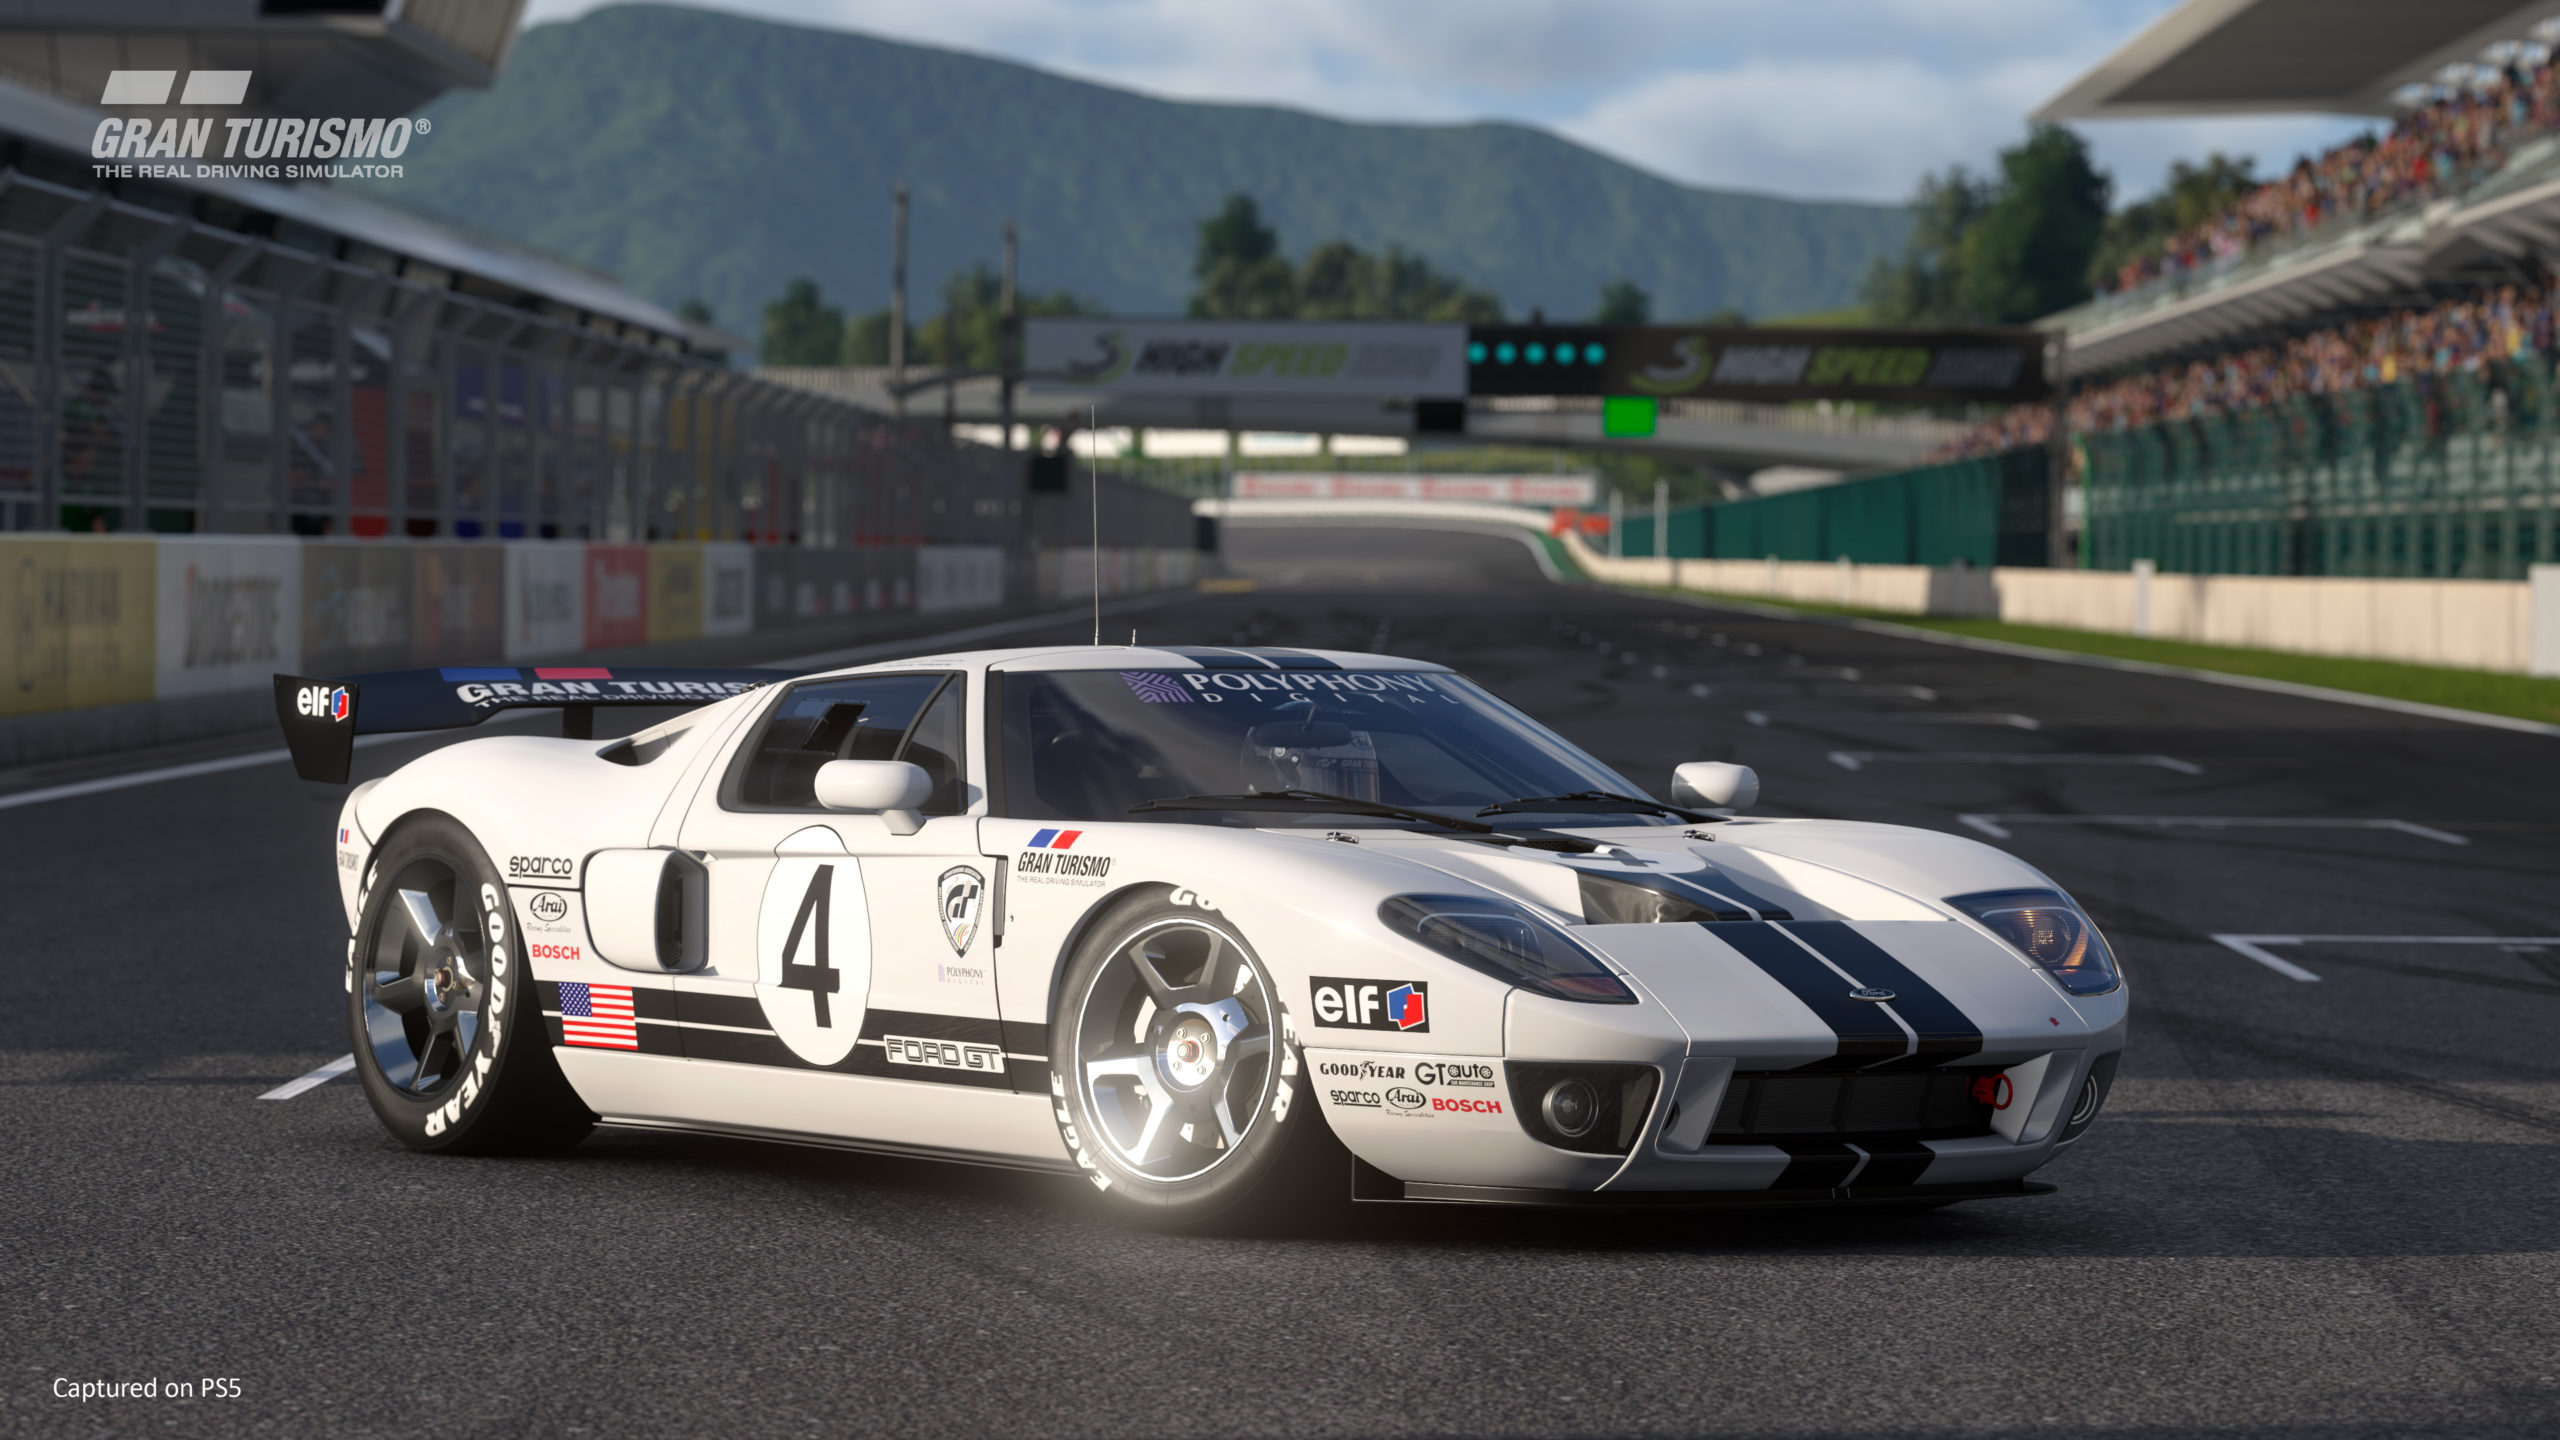 Gran Turismo 7 hits PS4 and PS5 March 4 2022 – watch the first